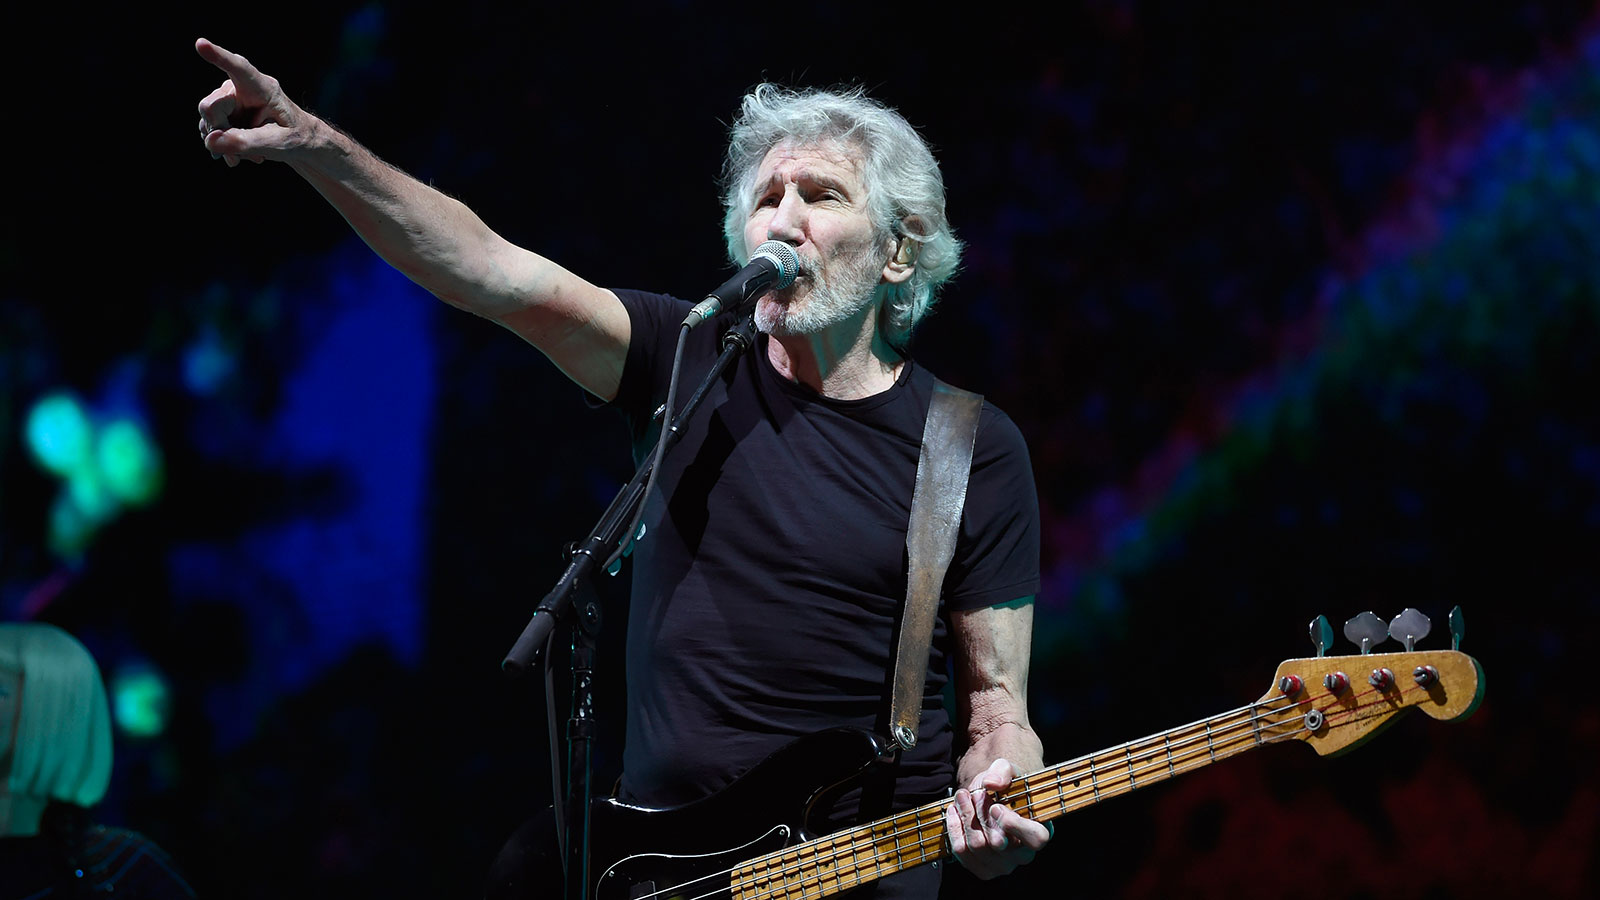 Roger Waters says David Gilmour and Richard Wright were “snipe-y ...